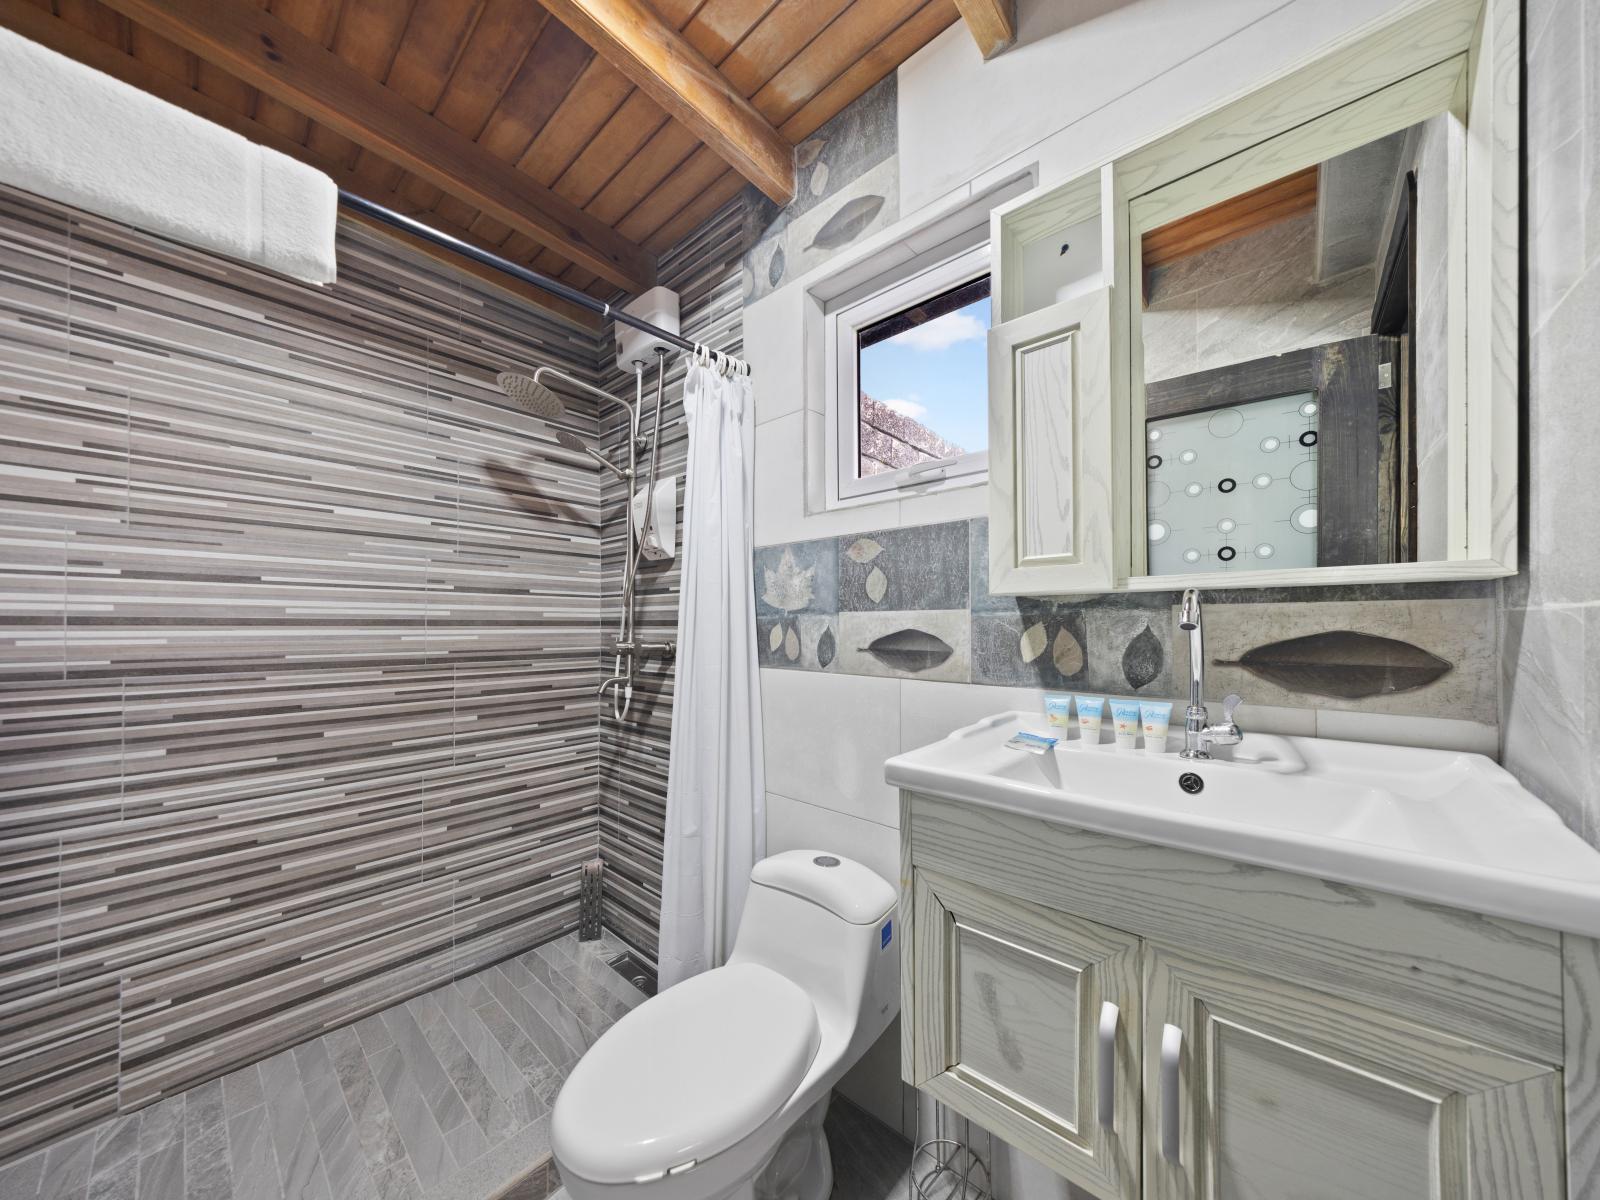 Relax and unwind in this stylish bathroom located in the separate house - Soft, ambient lighting and tasteful decor create an inviting atmosphere - Classic and contemporary elements blend harmoniously throughout